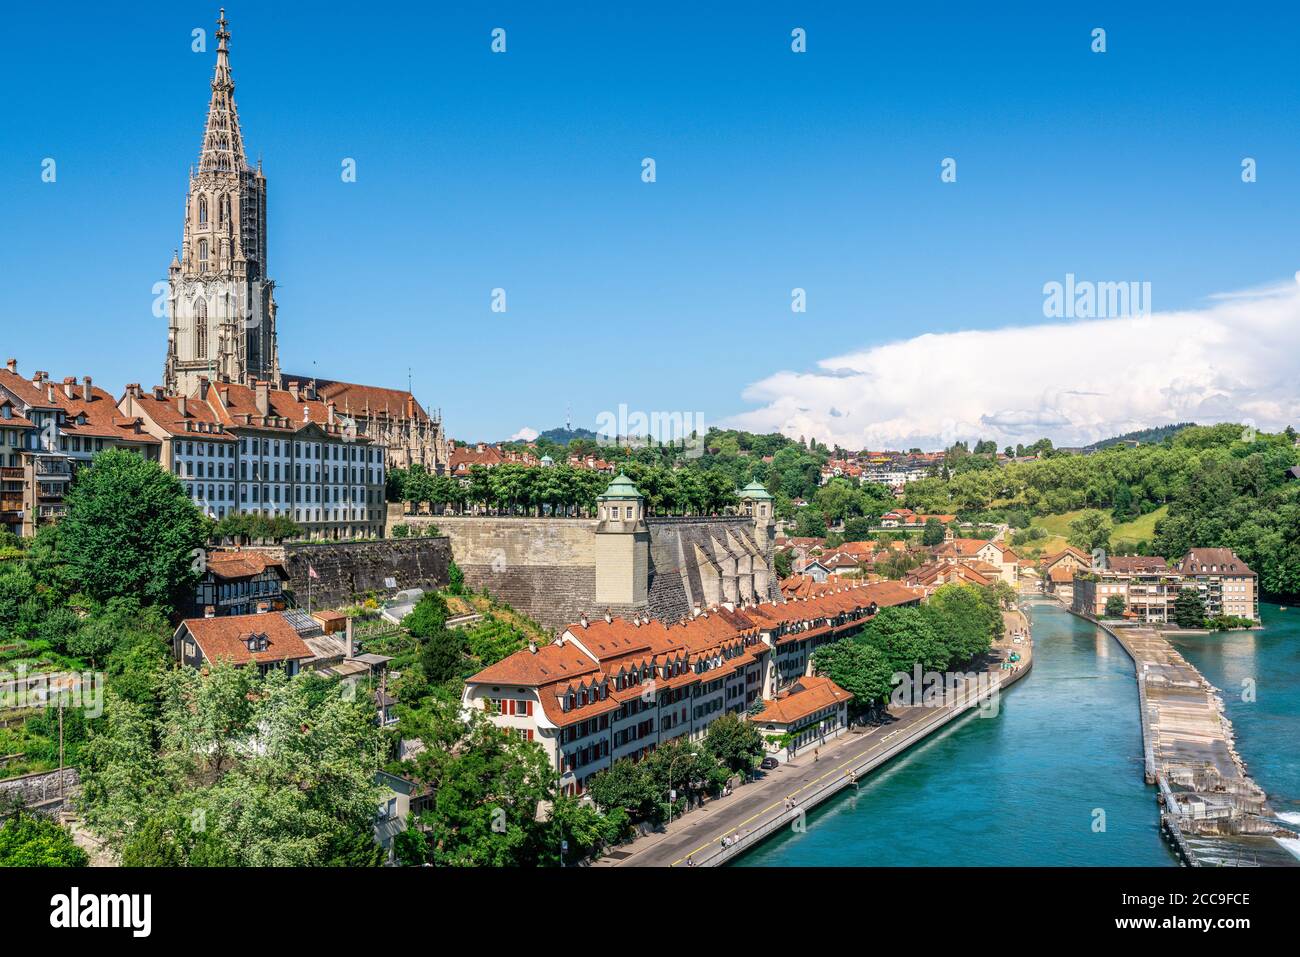 Scenic Bern old town cityscape with old buildings Bern Minster cathedral tower and Aare river view in Bern Switzerland Stock Photo